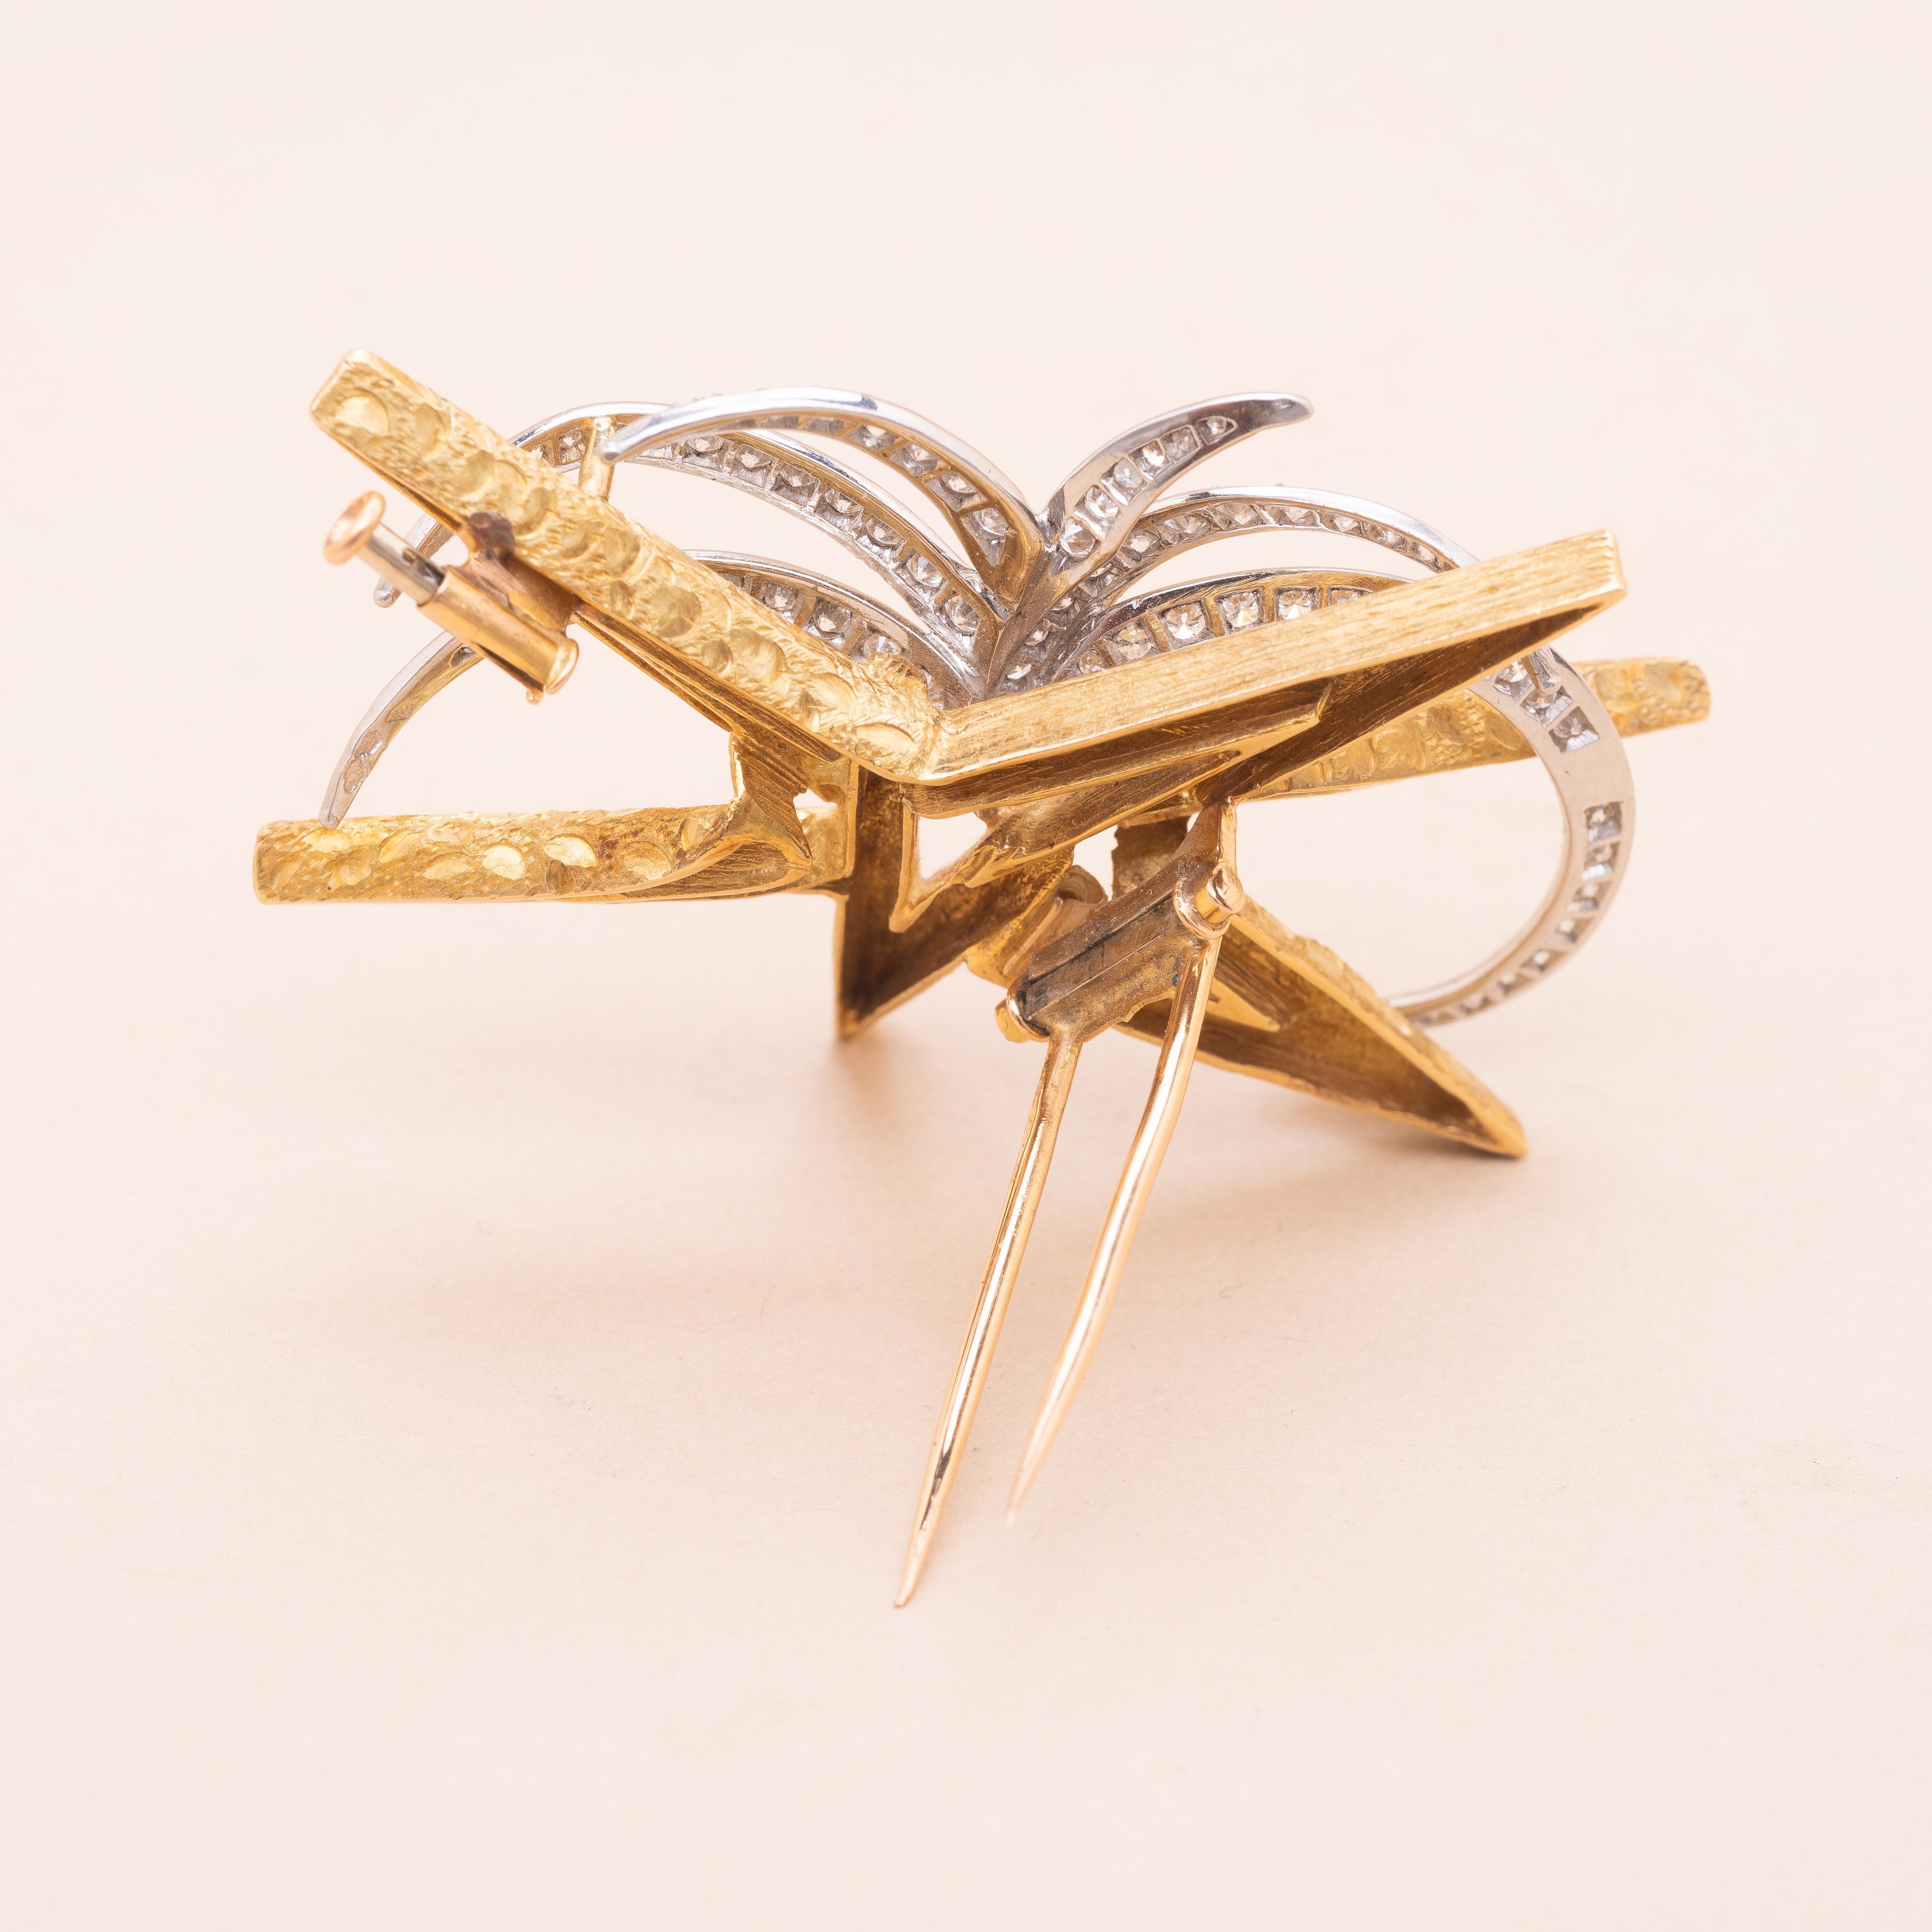 Boucheron. Vintage 18K gold and platinum star brooch. Made of  brushed and engraved gold triangles and lines set with round modern brillant and 8/8 cut diamonds.  

Gorgeous creation from the fifties 

Signed on the back Boucheron Paris

Number